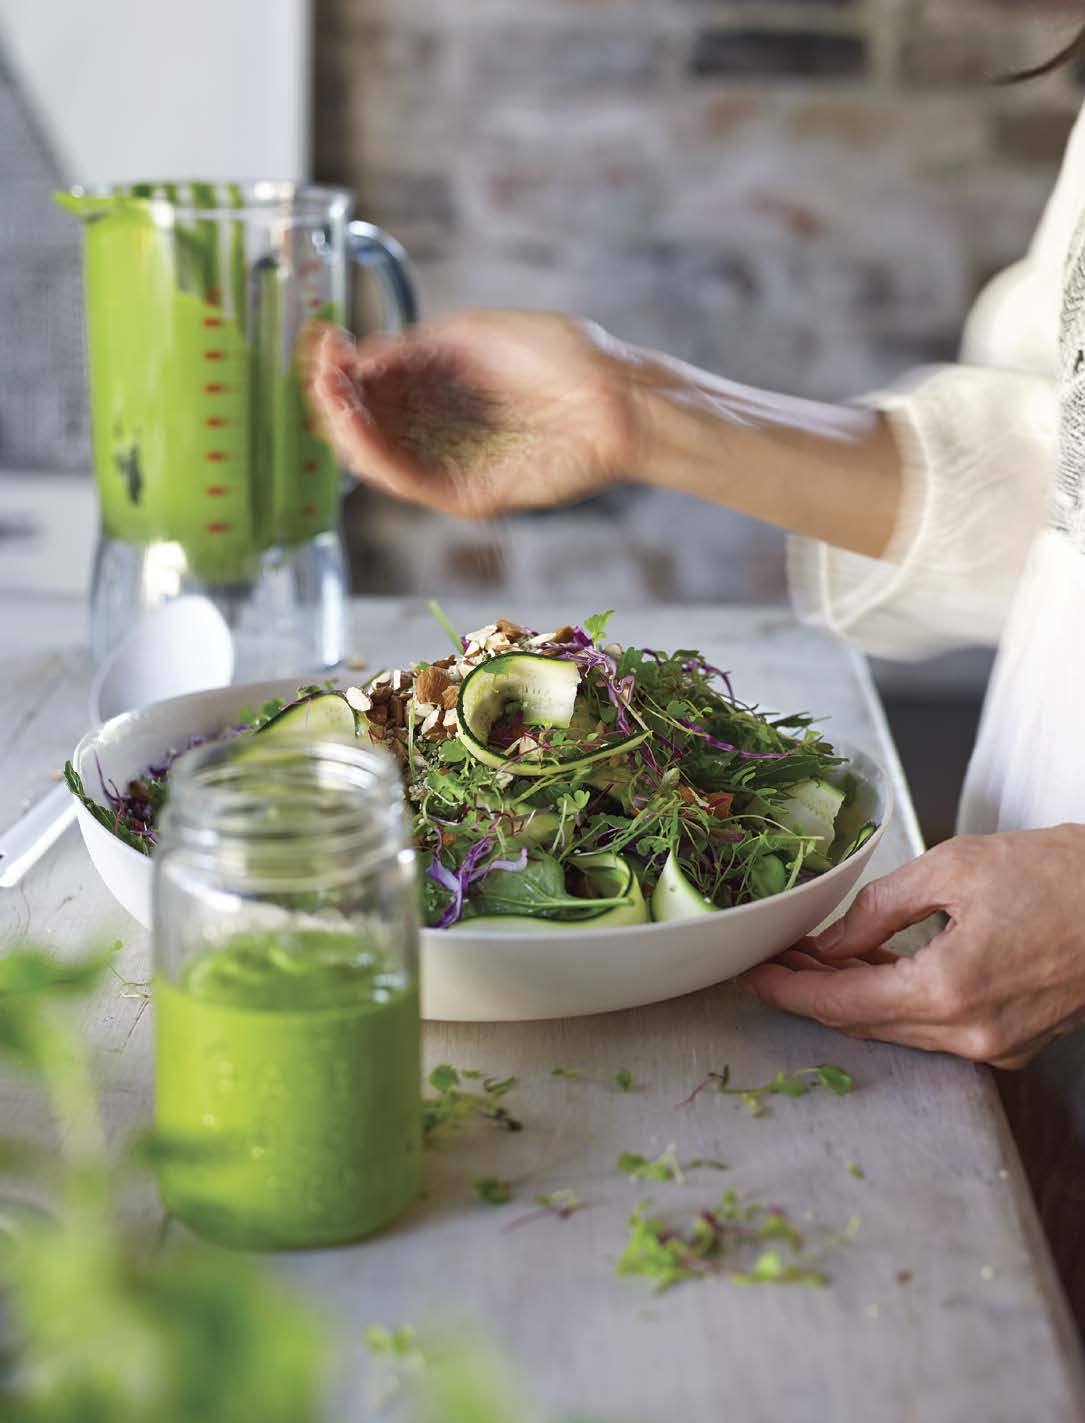 Green Queen salad and dressing from Tess Masters' Blender Girl